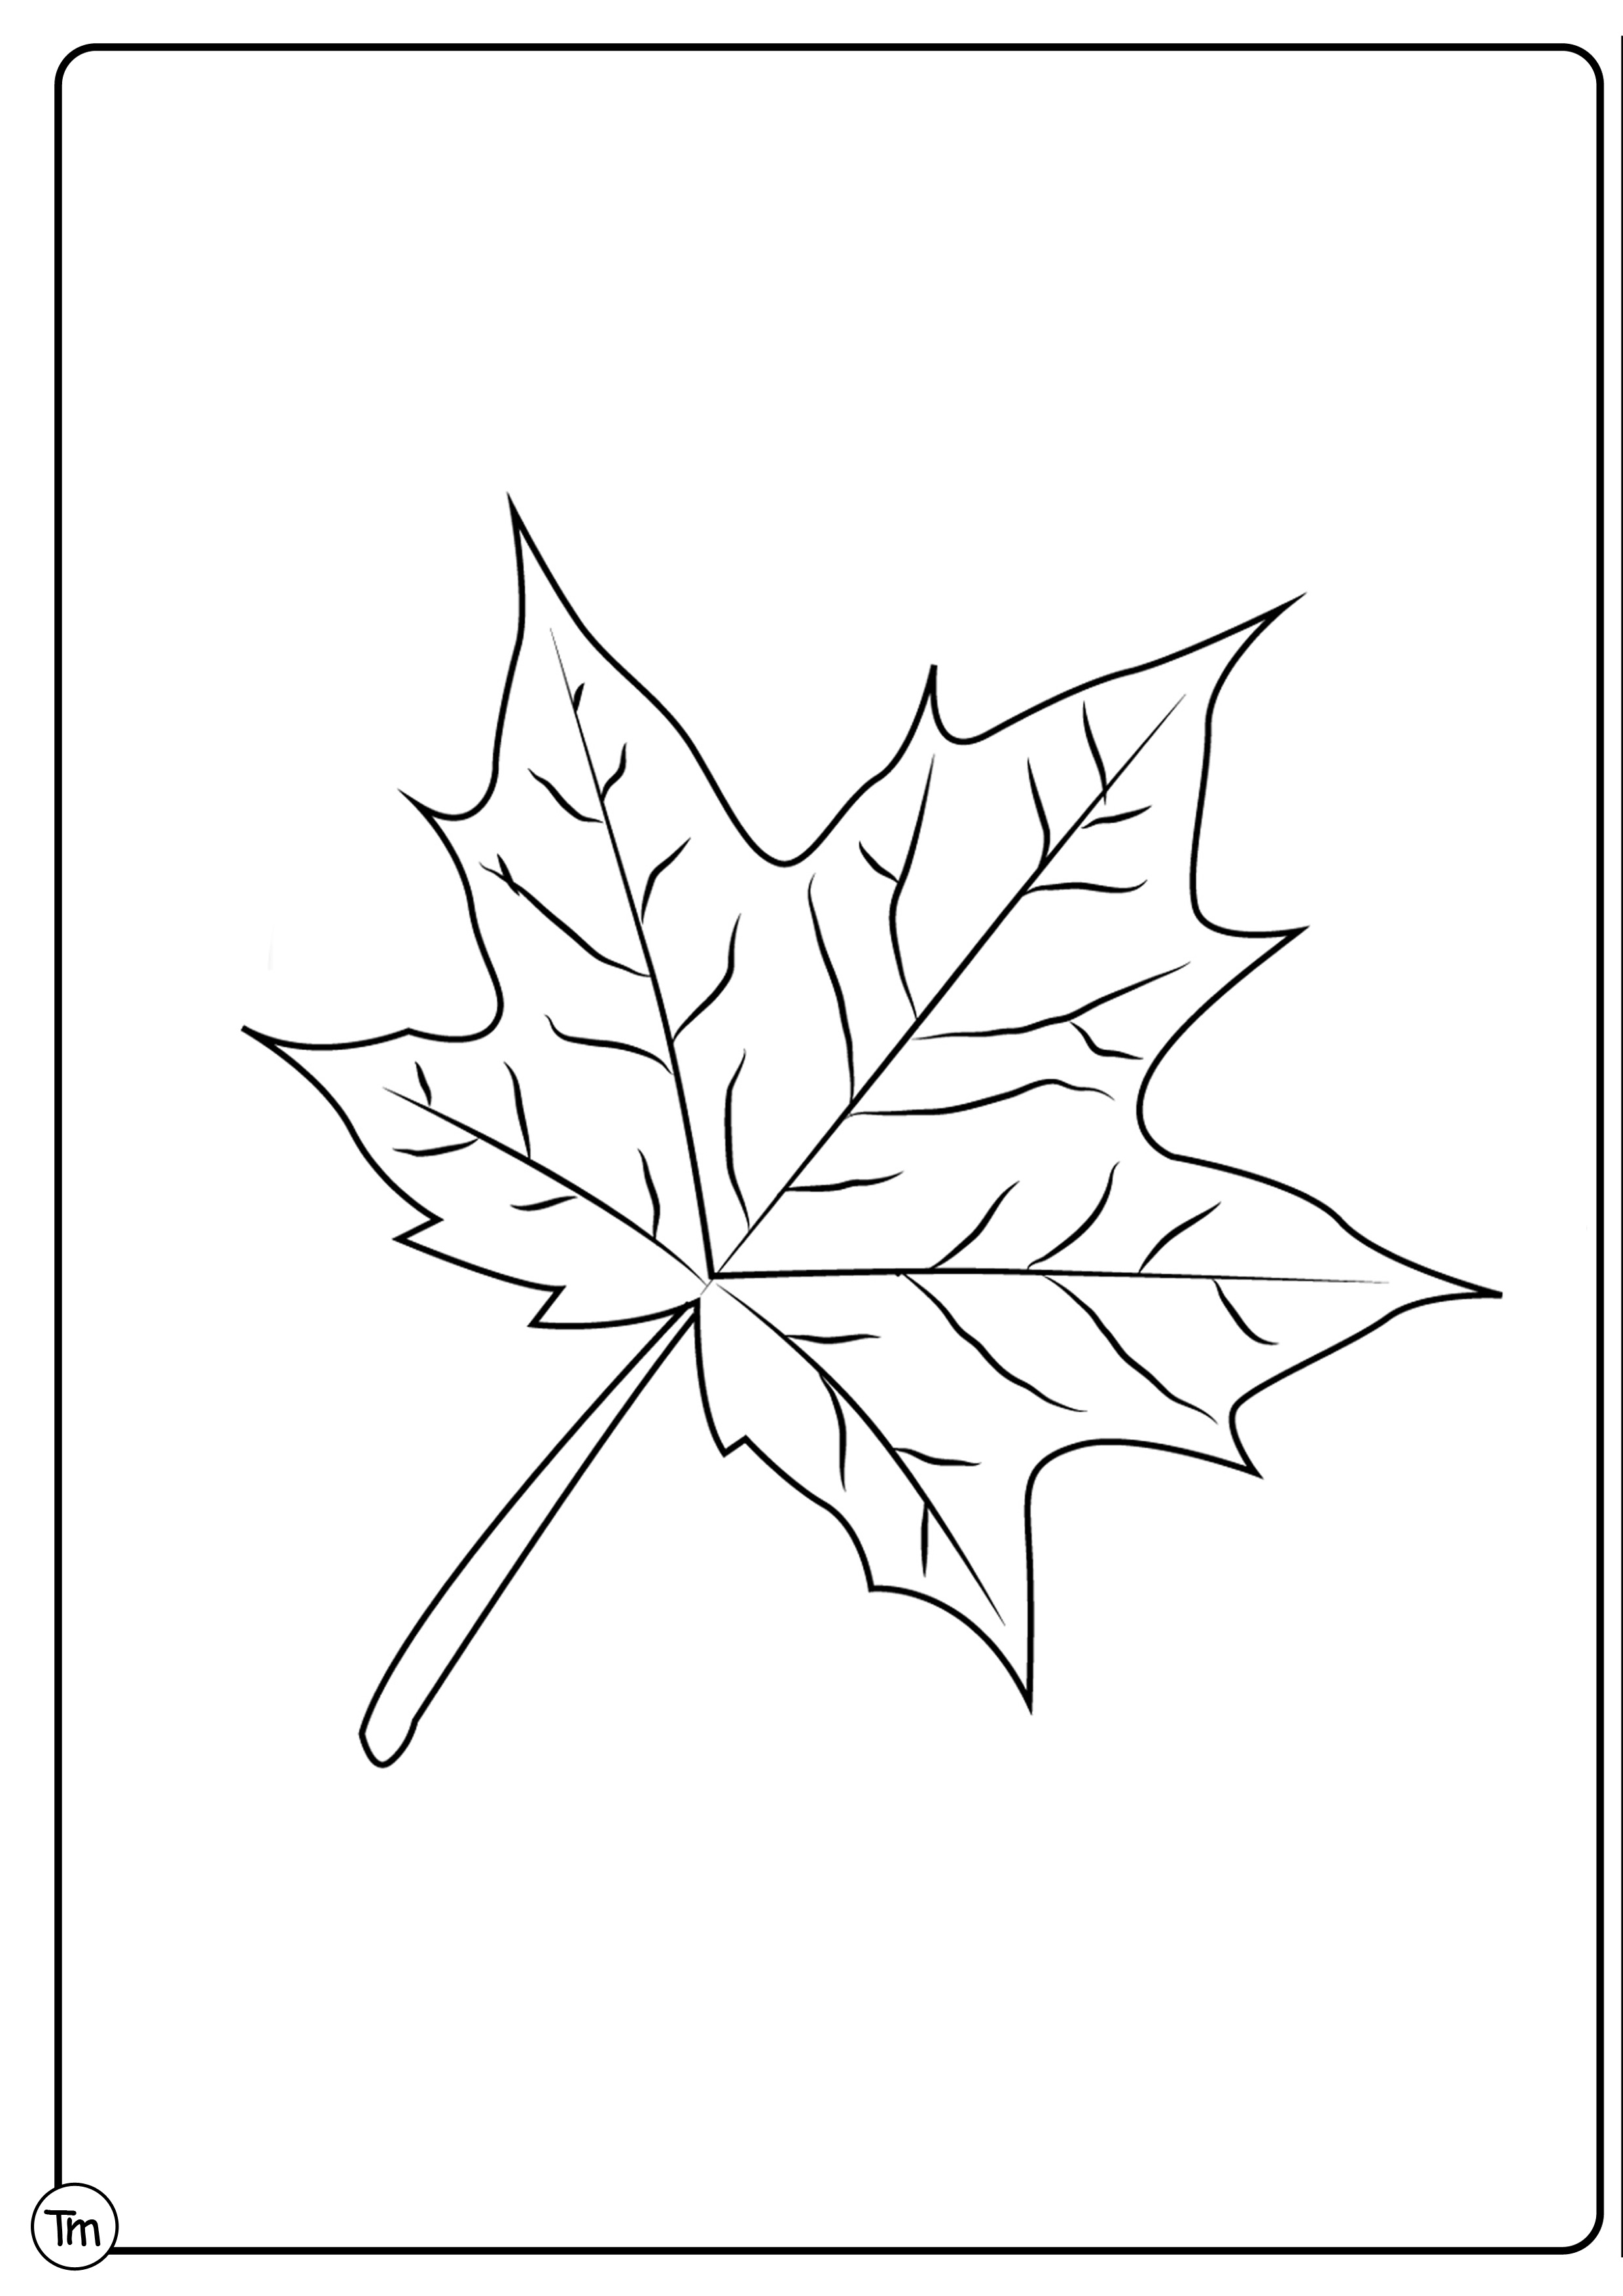 printable-fall-leaves-patterns-and-learning-activities-oblock-books